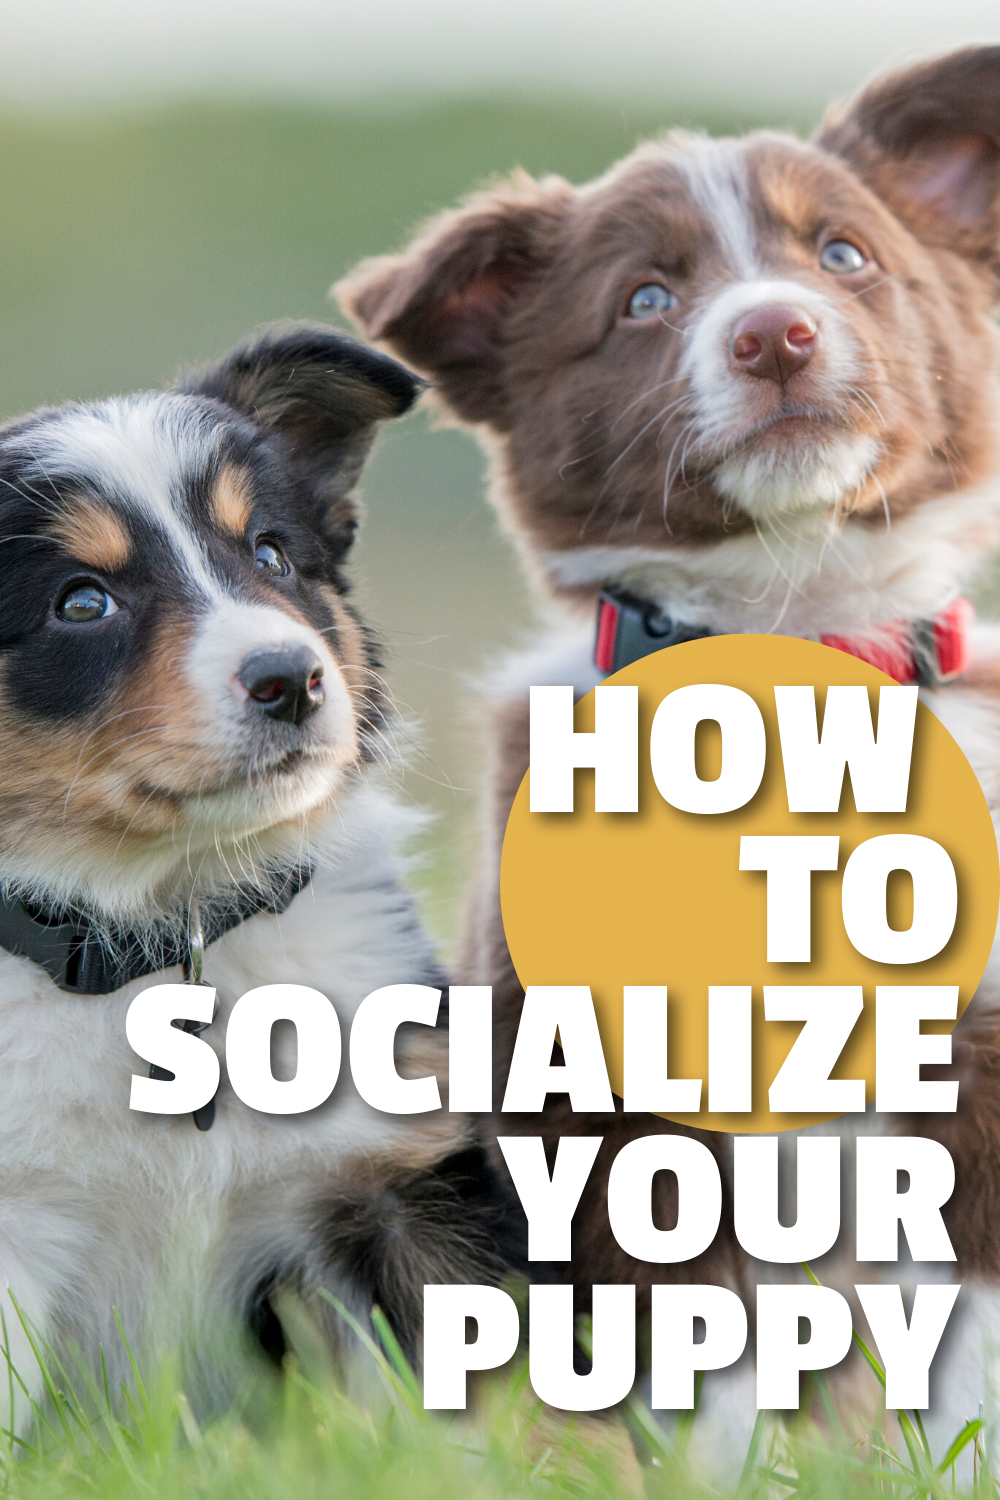 How to properly socialize your puppy